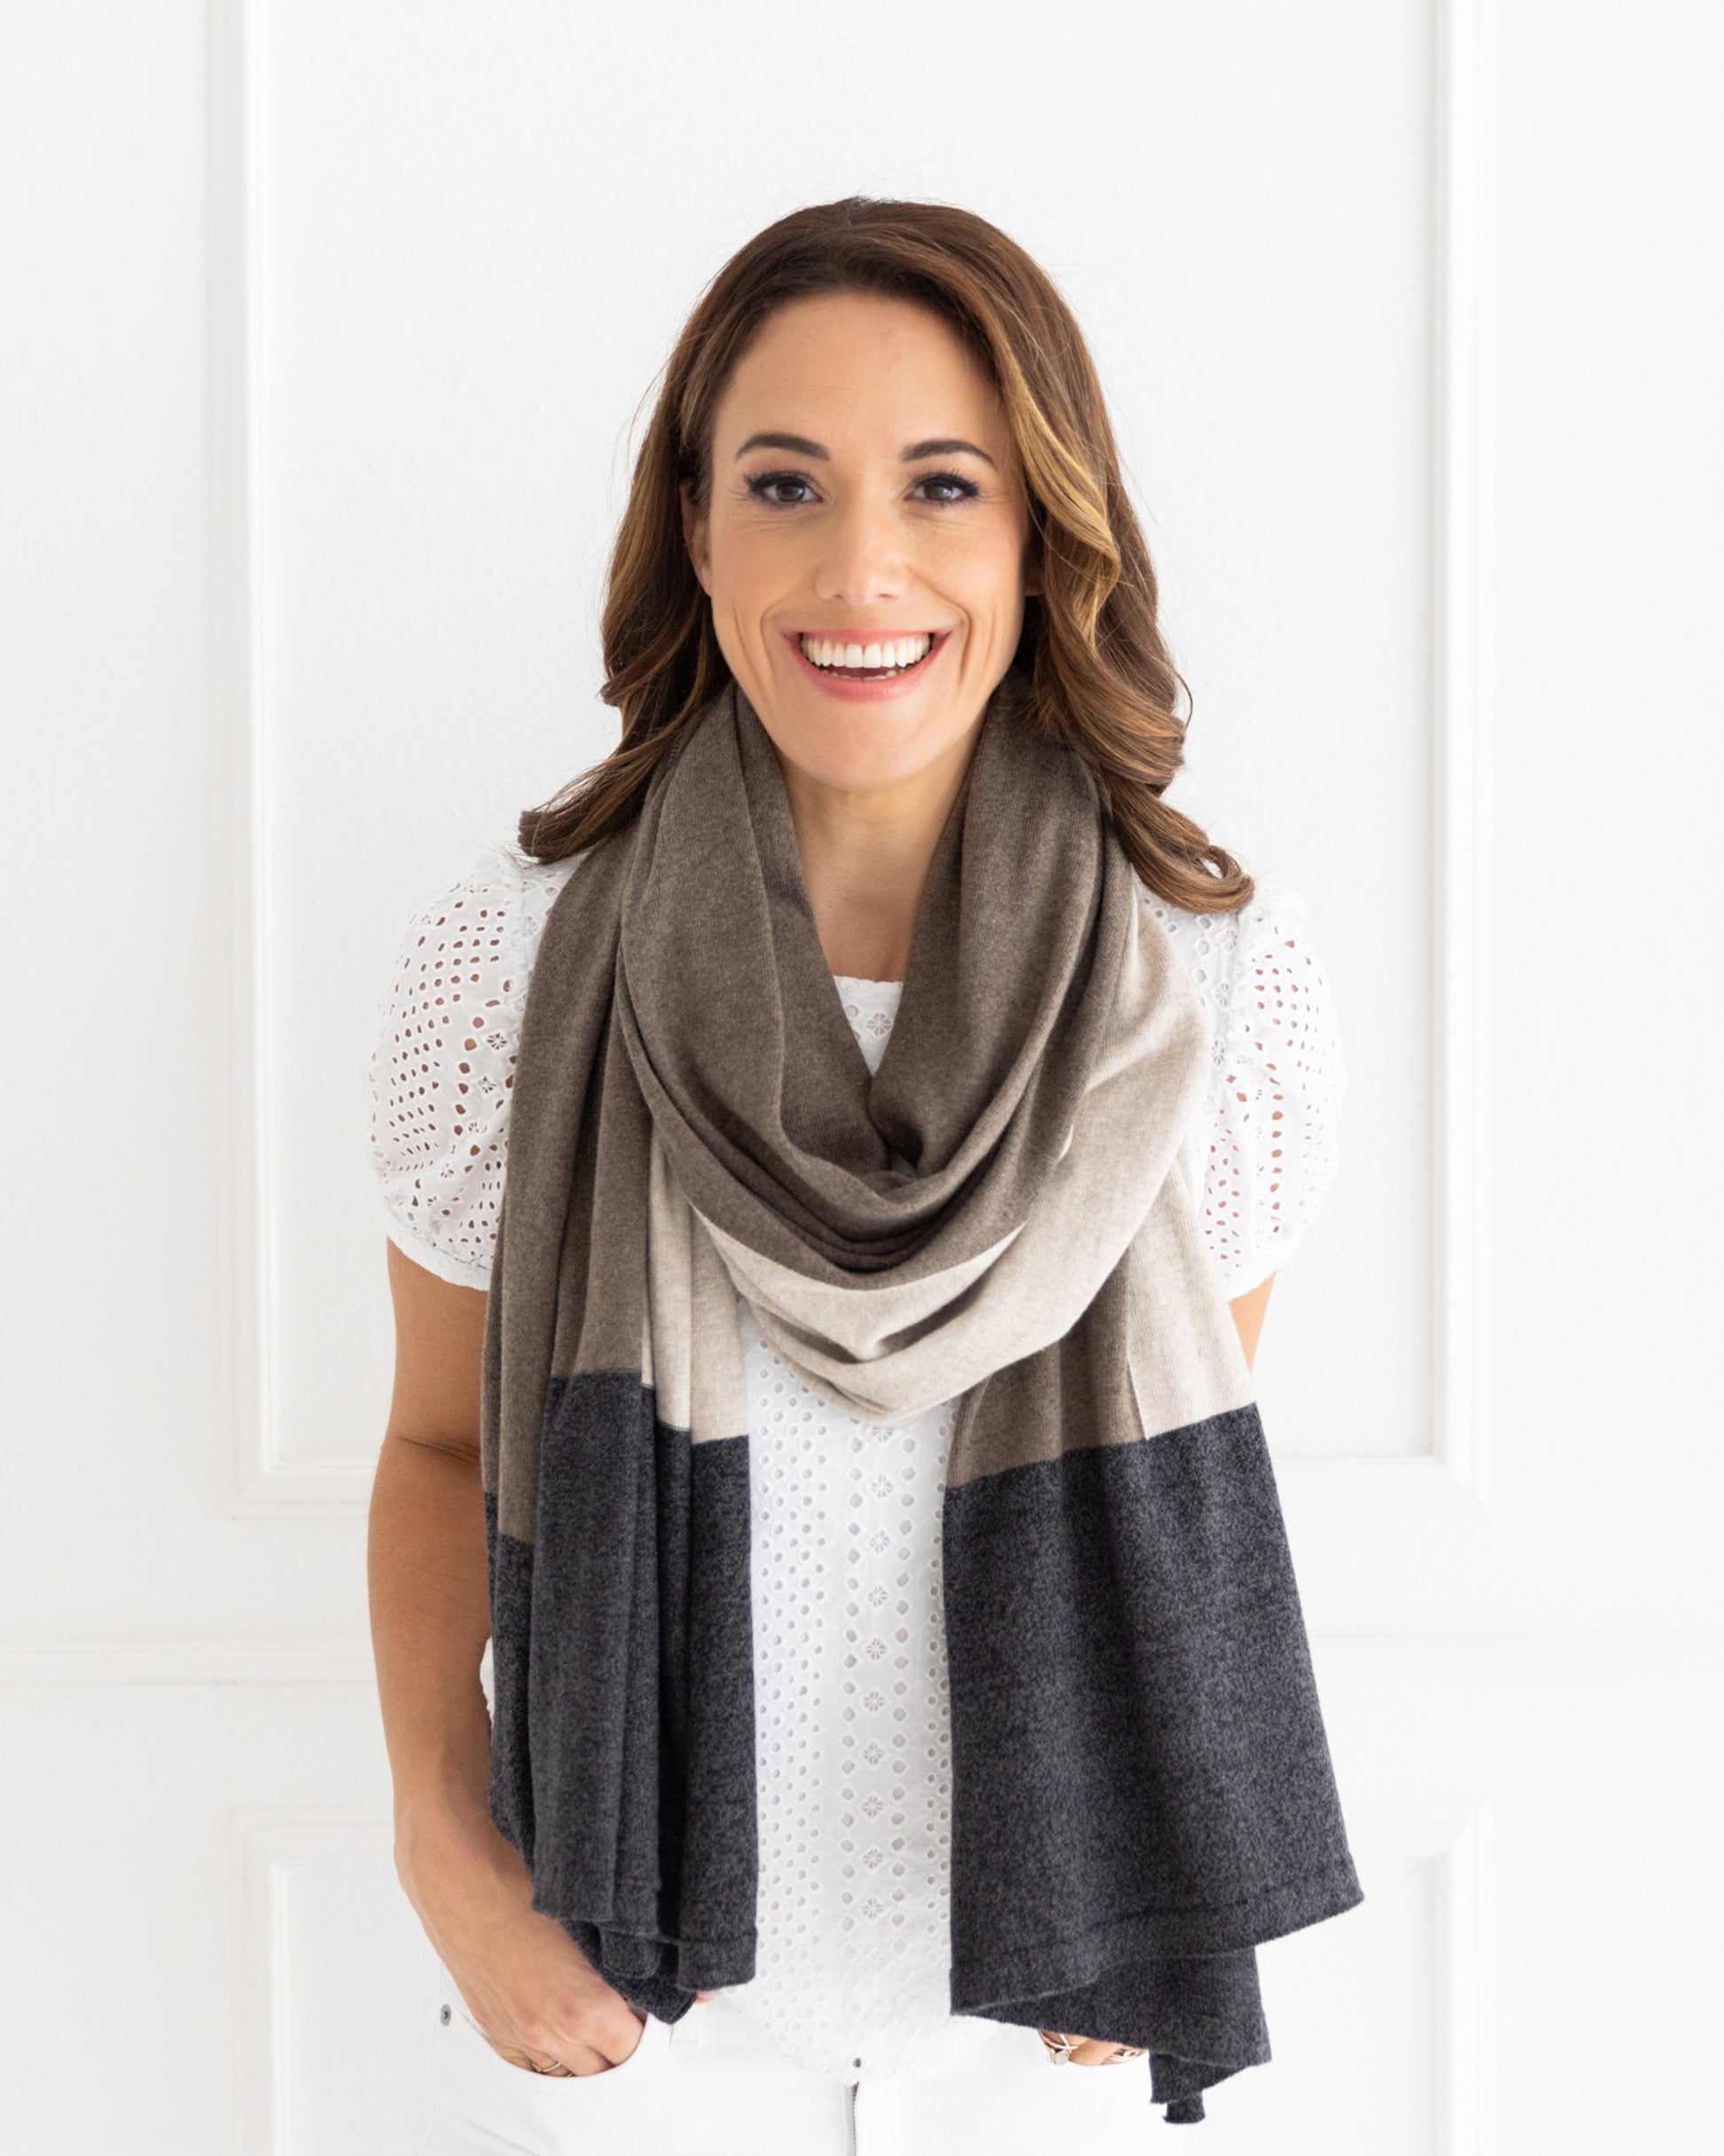 Woman wearing the Dreamsoft Travel Scarf in Brownstone Colorblock which is a brown, tan and gray scarf, worn as a modern loop scarf around her neck